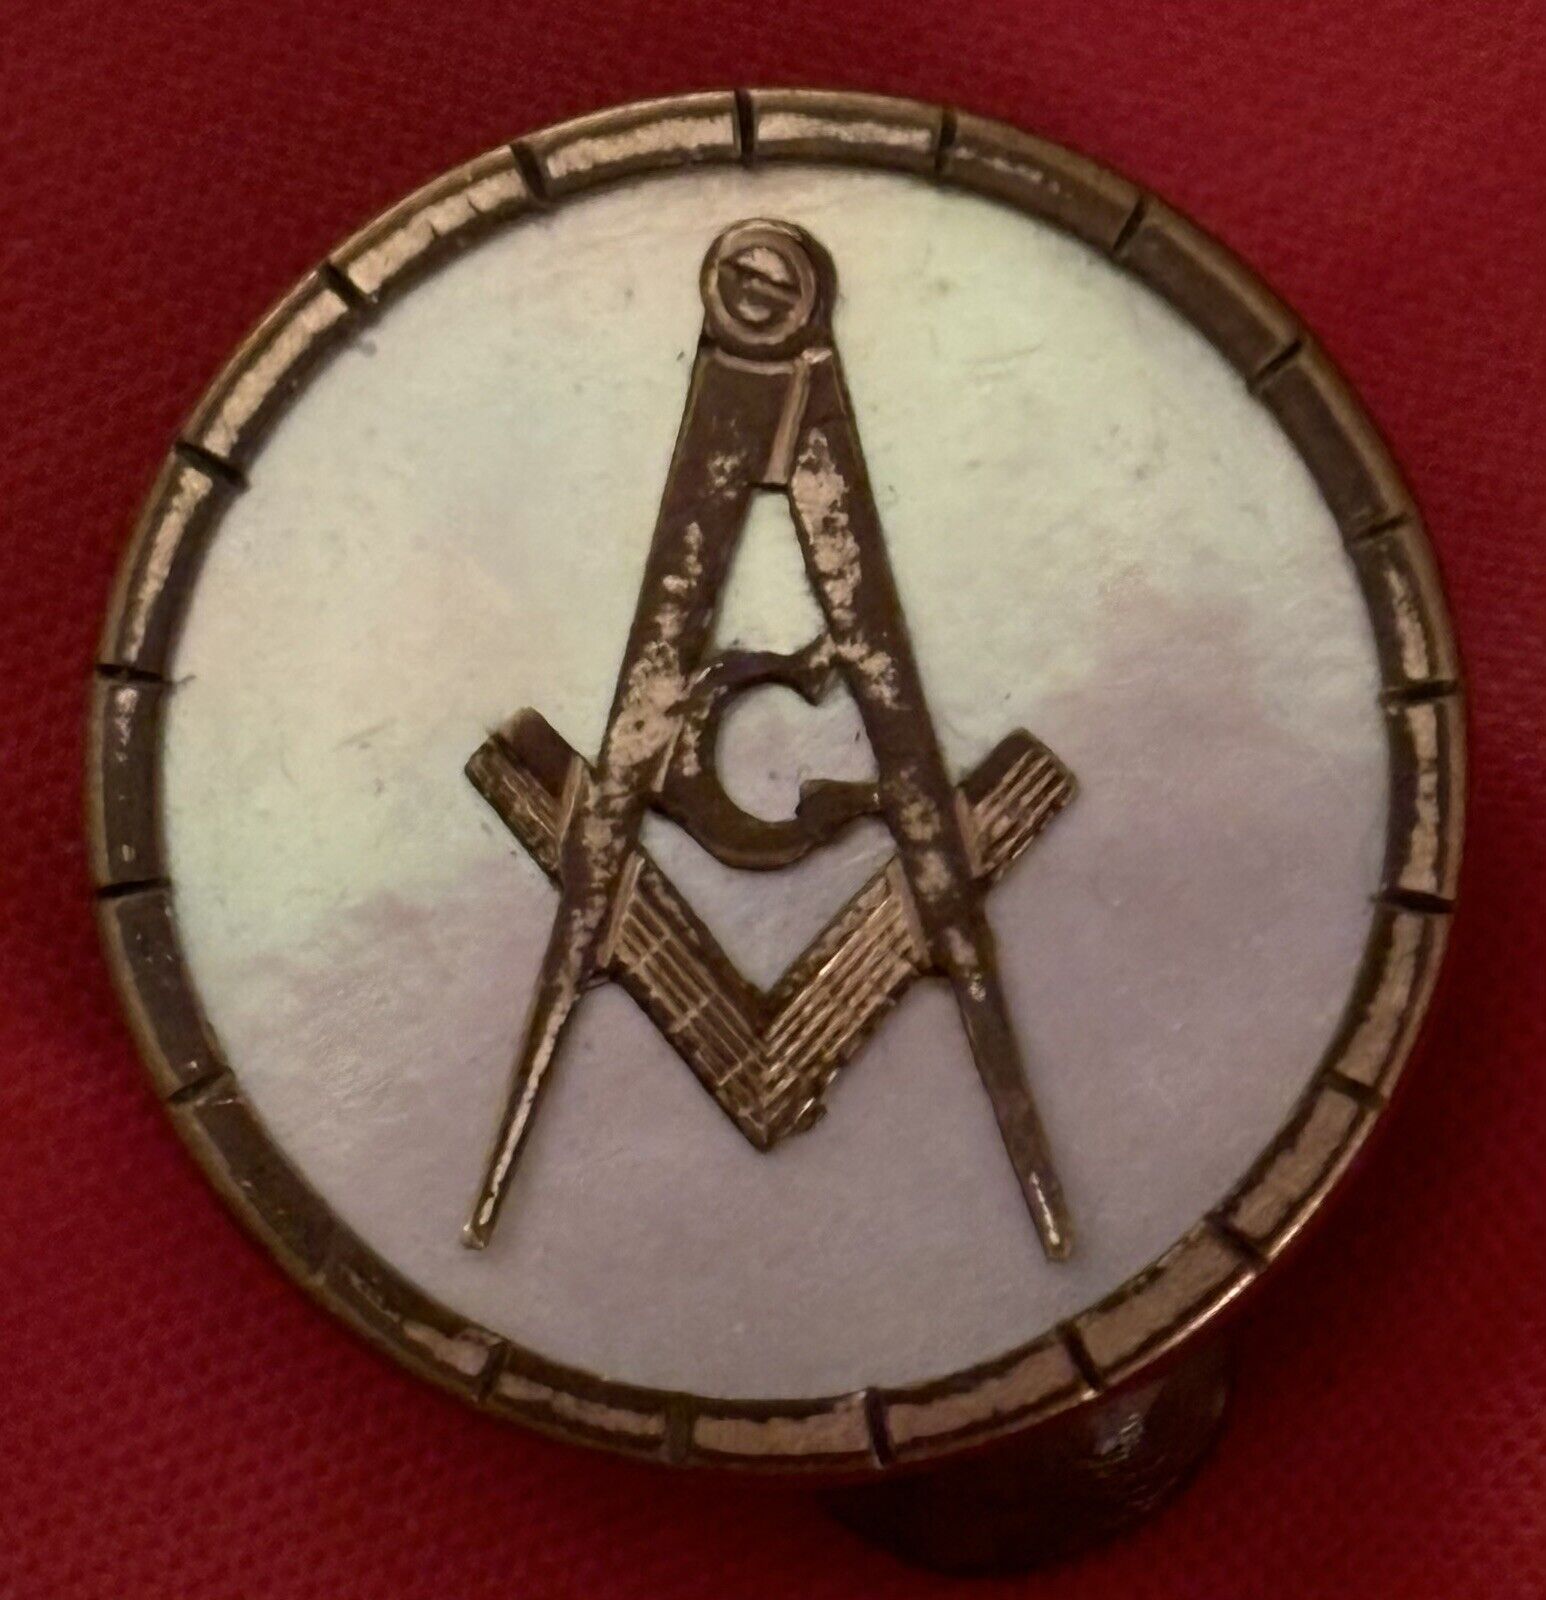 ANTIQUE 1884 PATENT MASONIC COMPASS LAPEL PIN CUFFLINK MOTHER OF PEARL GOLD TONE